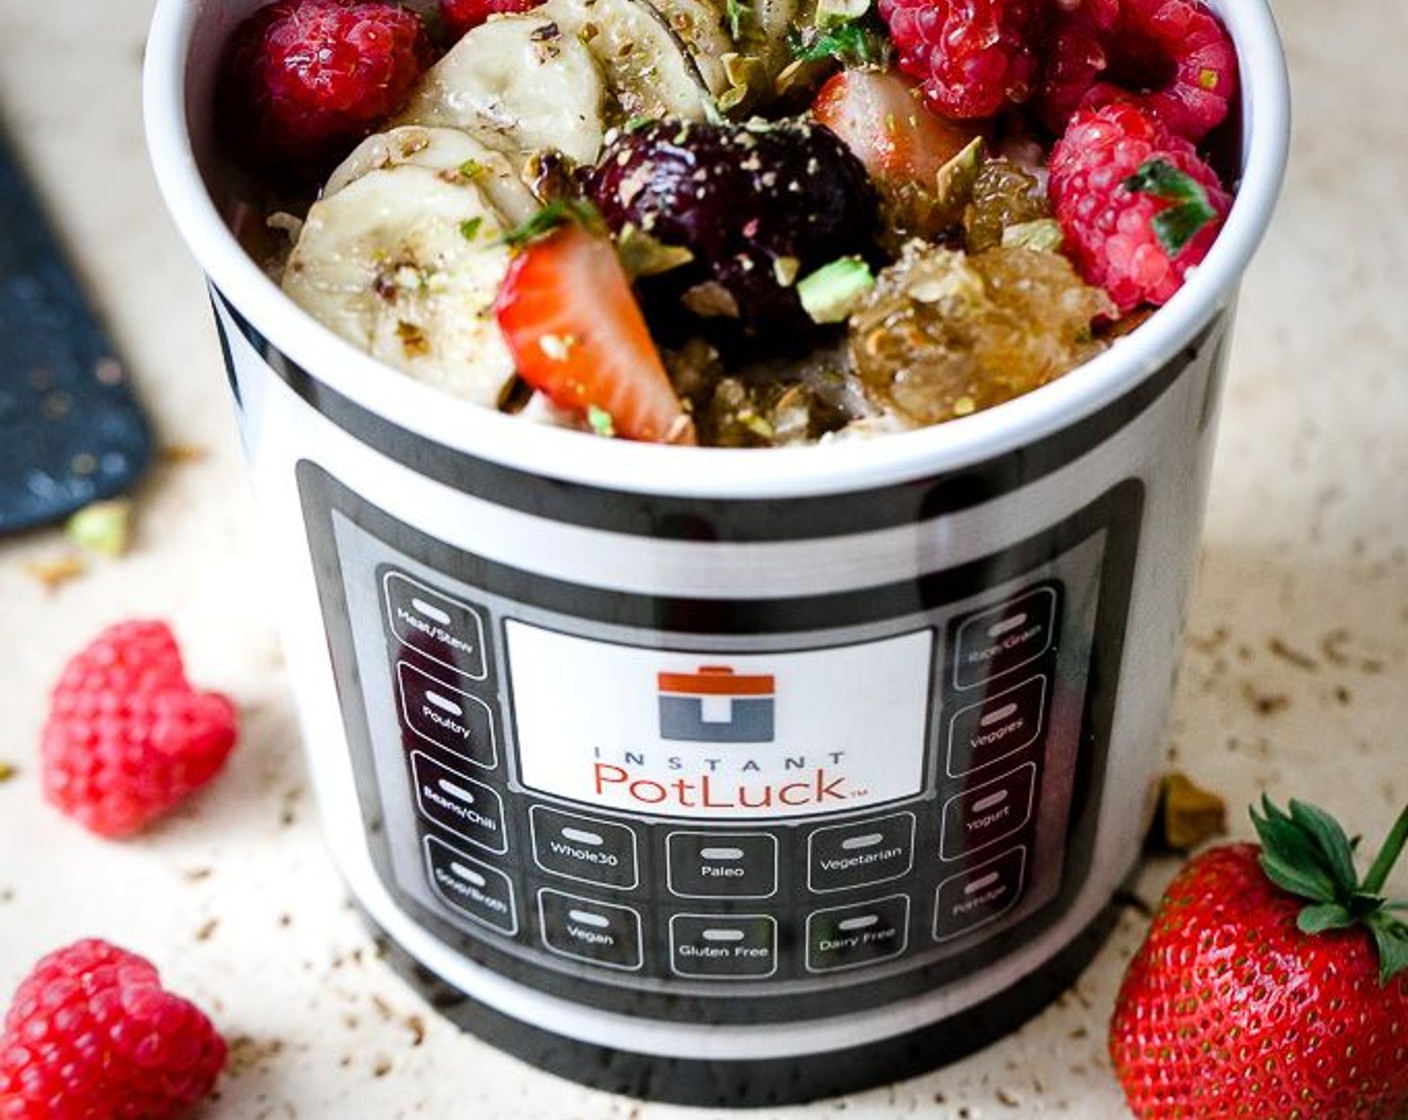 step 6 Top with your choice of cinnamon, almonds, walnuts, coconut flakes, fresh fruit such as strawberries, blackberries, bananas, blueberries, dried cranberries, dried apricots, cinnamon, honey, agave, and more. Enjoy!